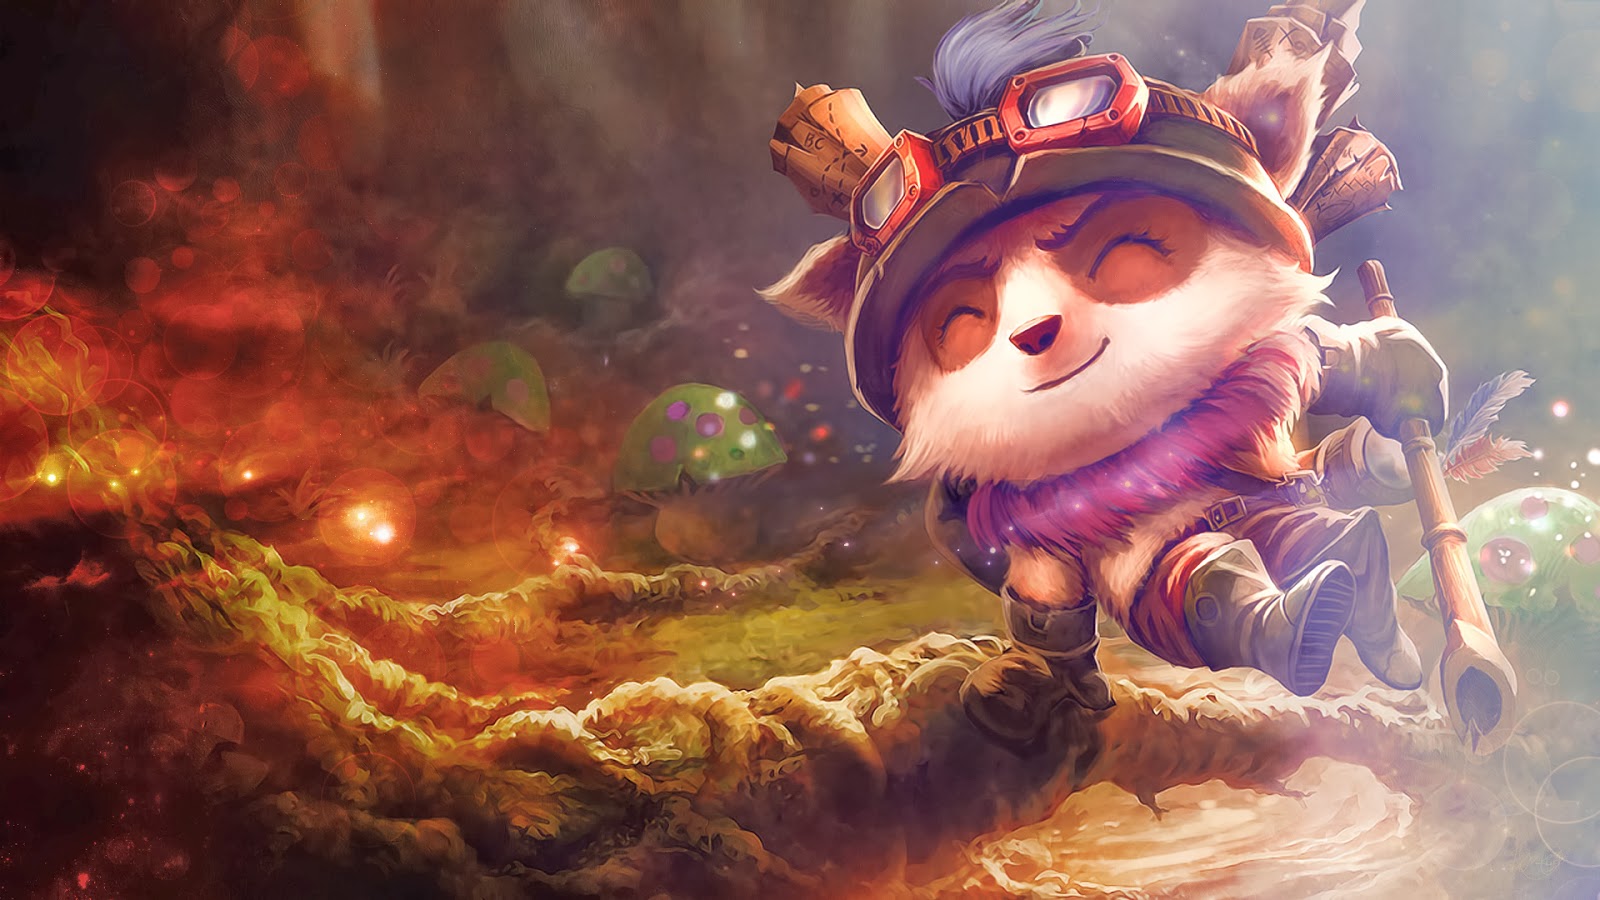  Smiling Forest LoL League of Legends Champion Game HD Wallpaper 15a